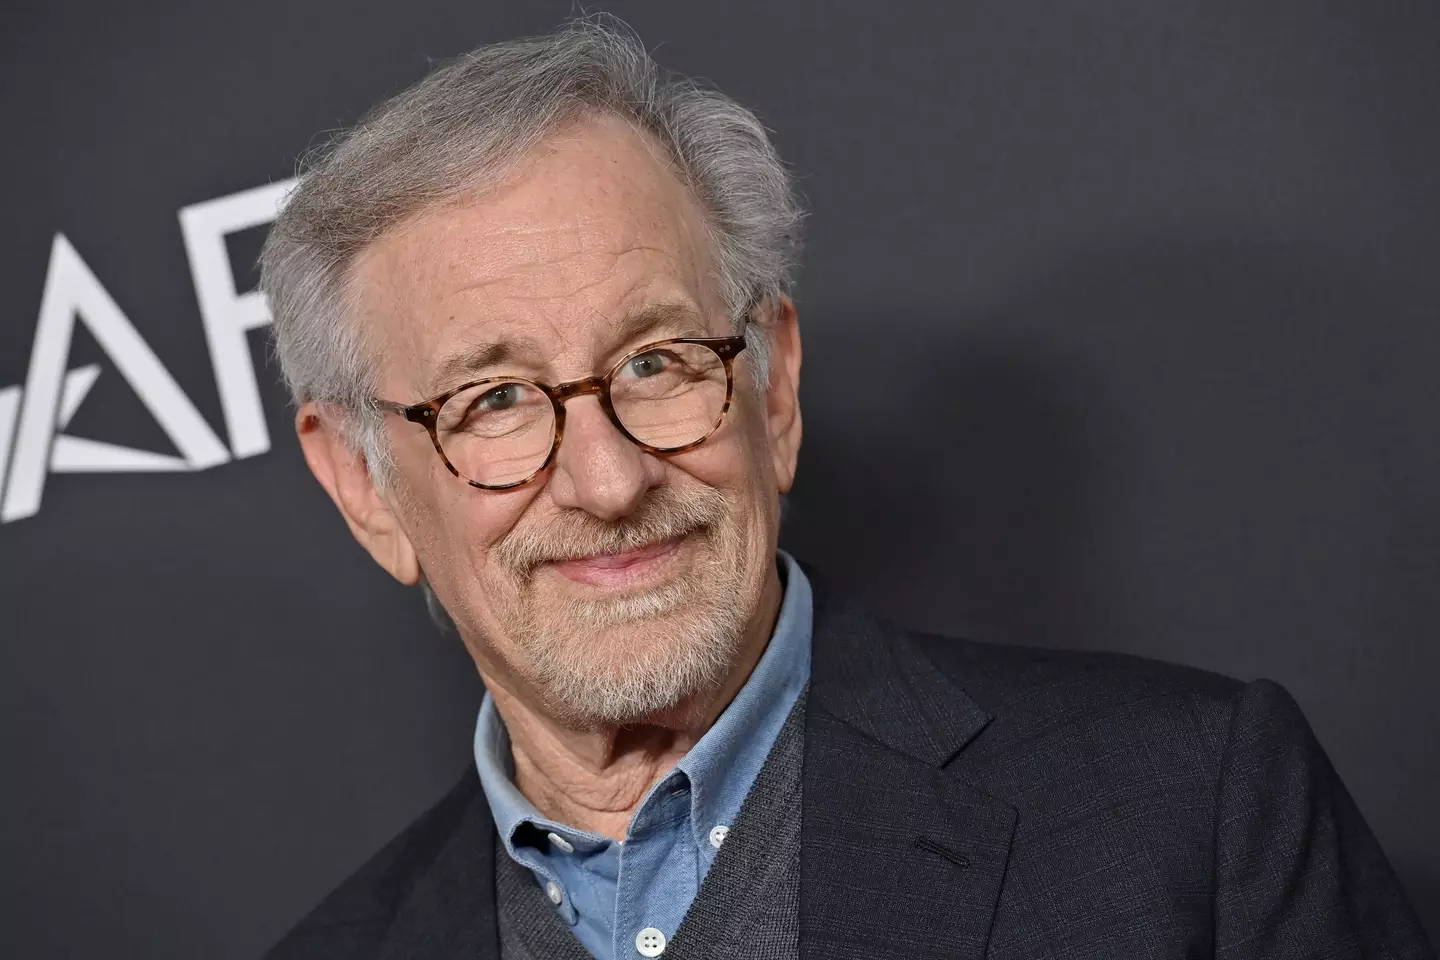 Spielberg’s top-rated films on Rotten Tomatoes come in at 94 percent score or higher.